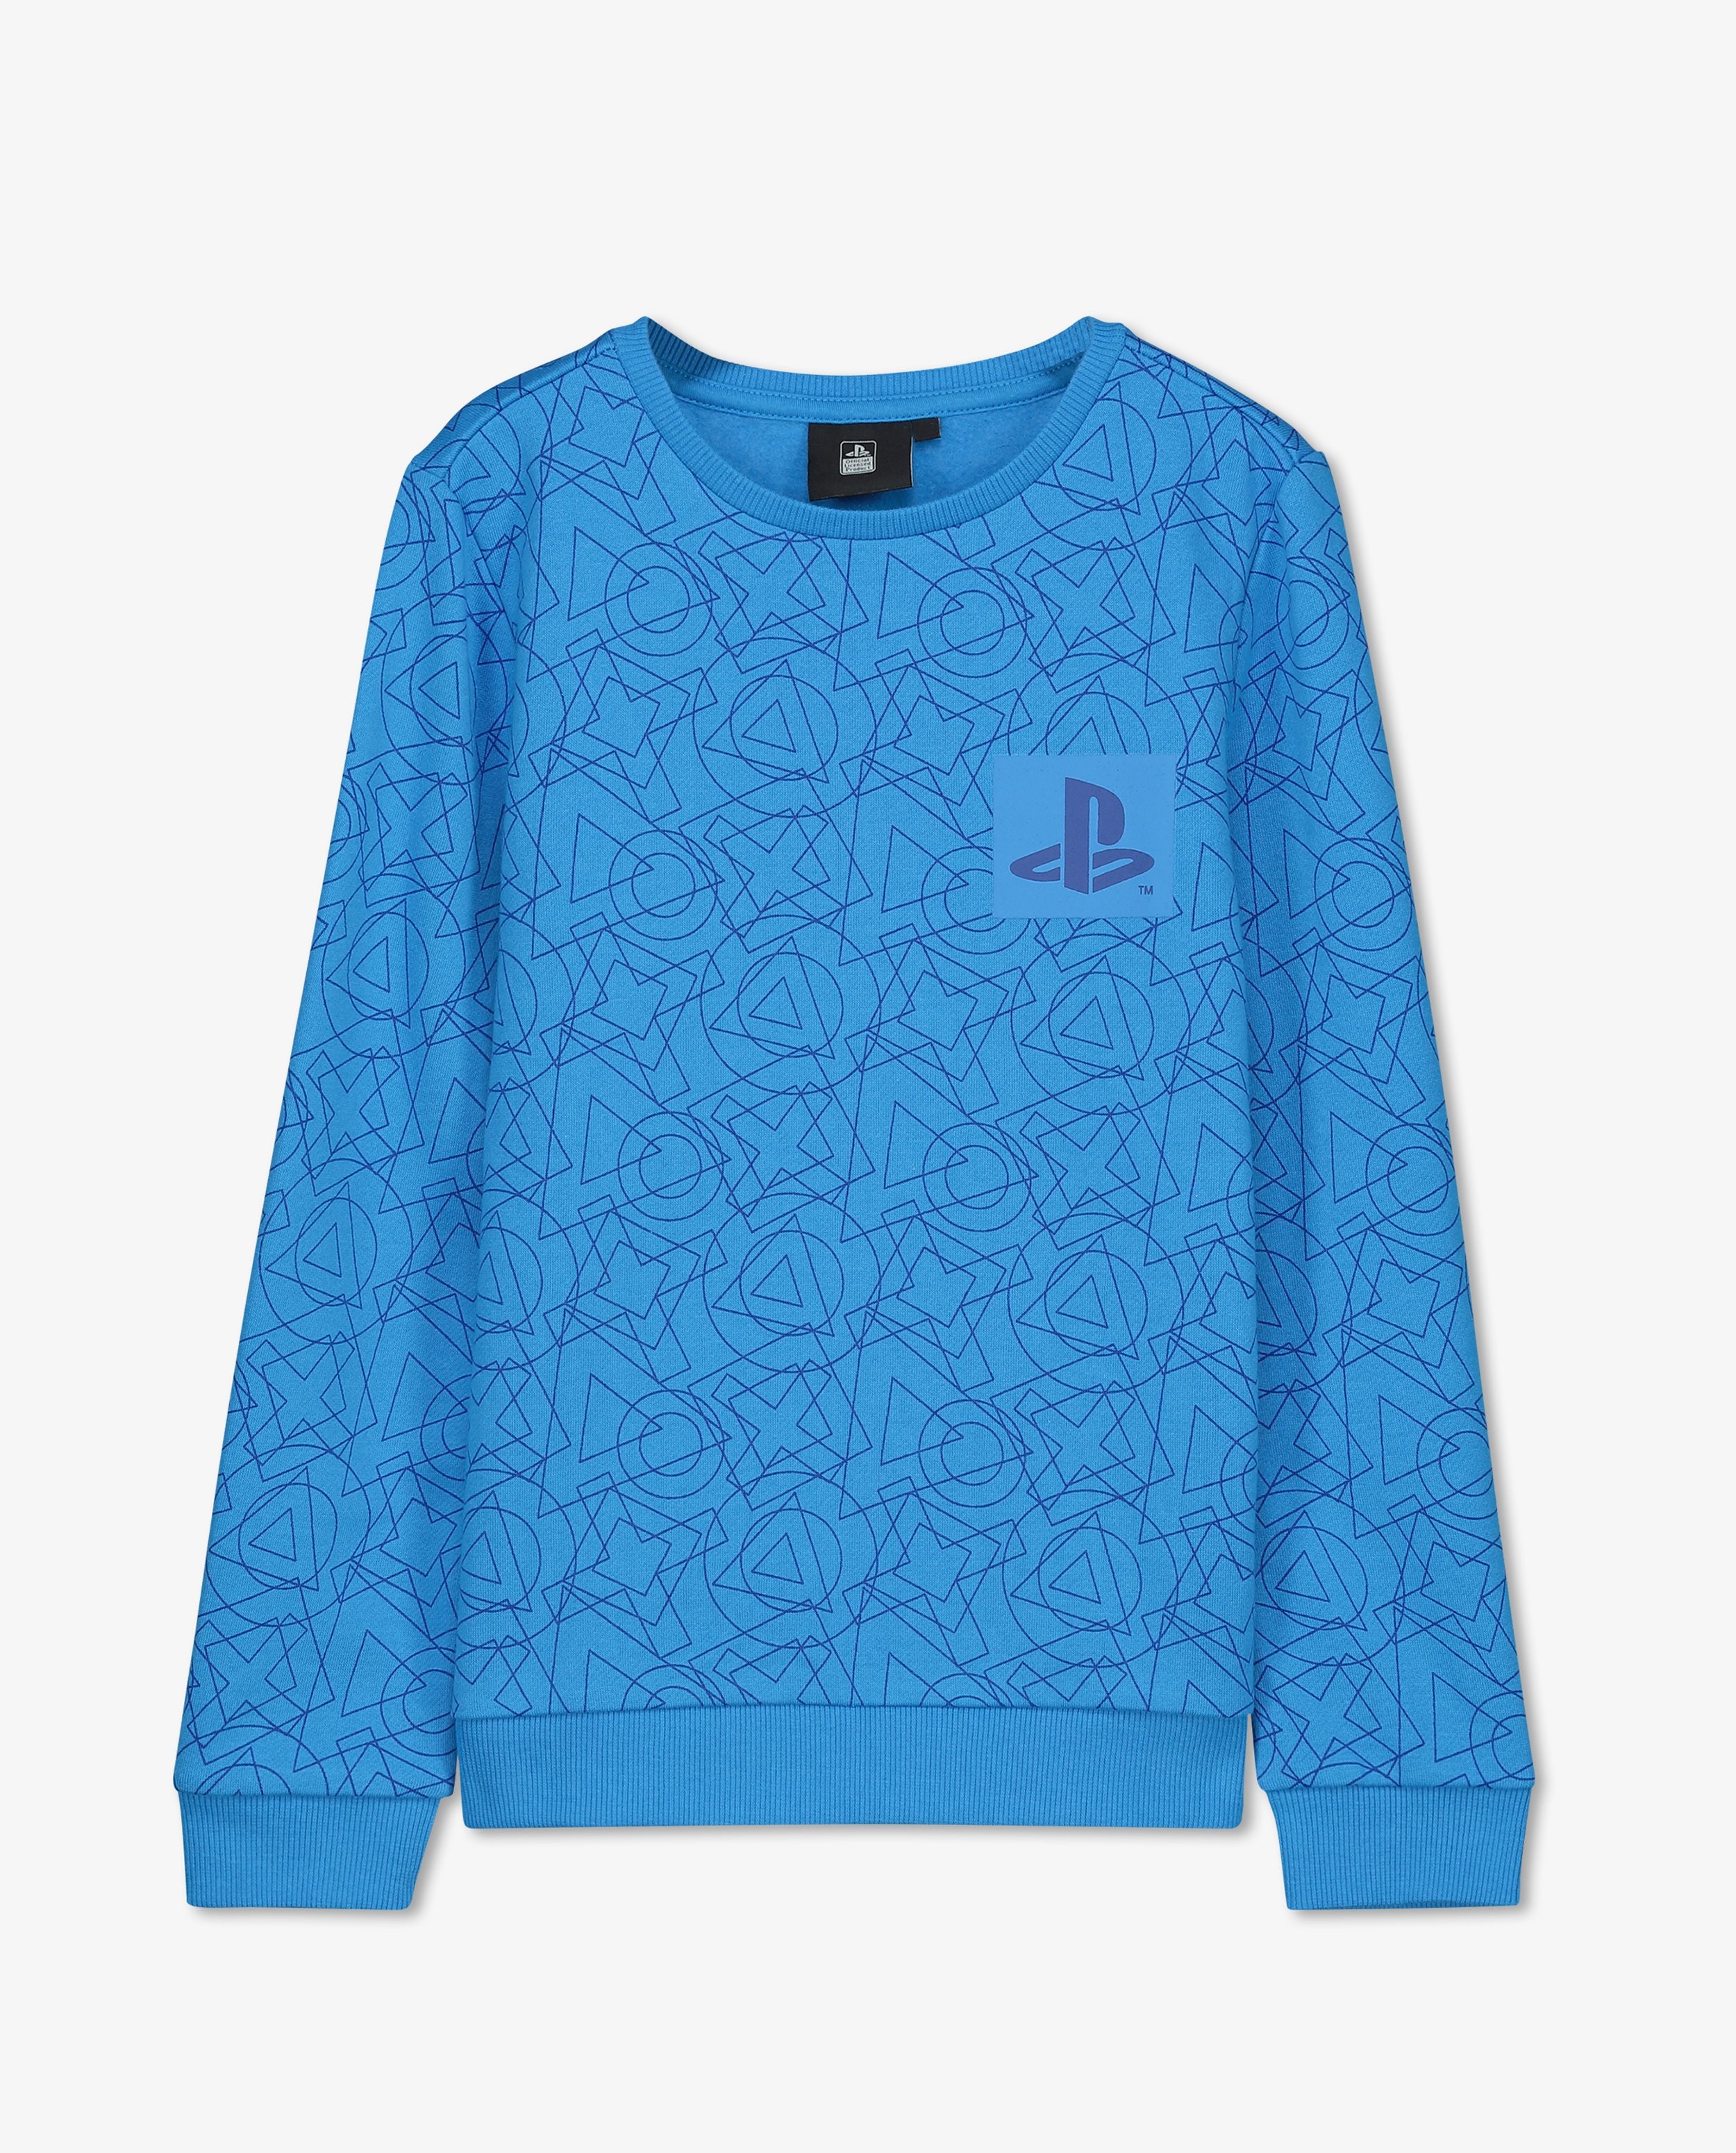 Unisex PlayStation-sweater - null - Playstation